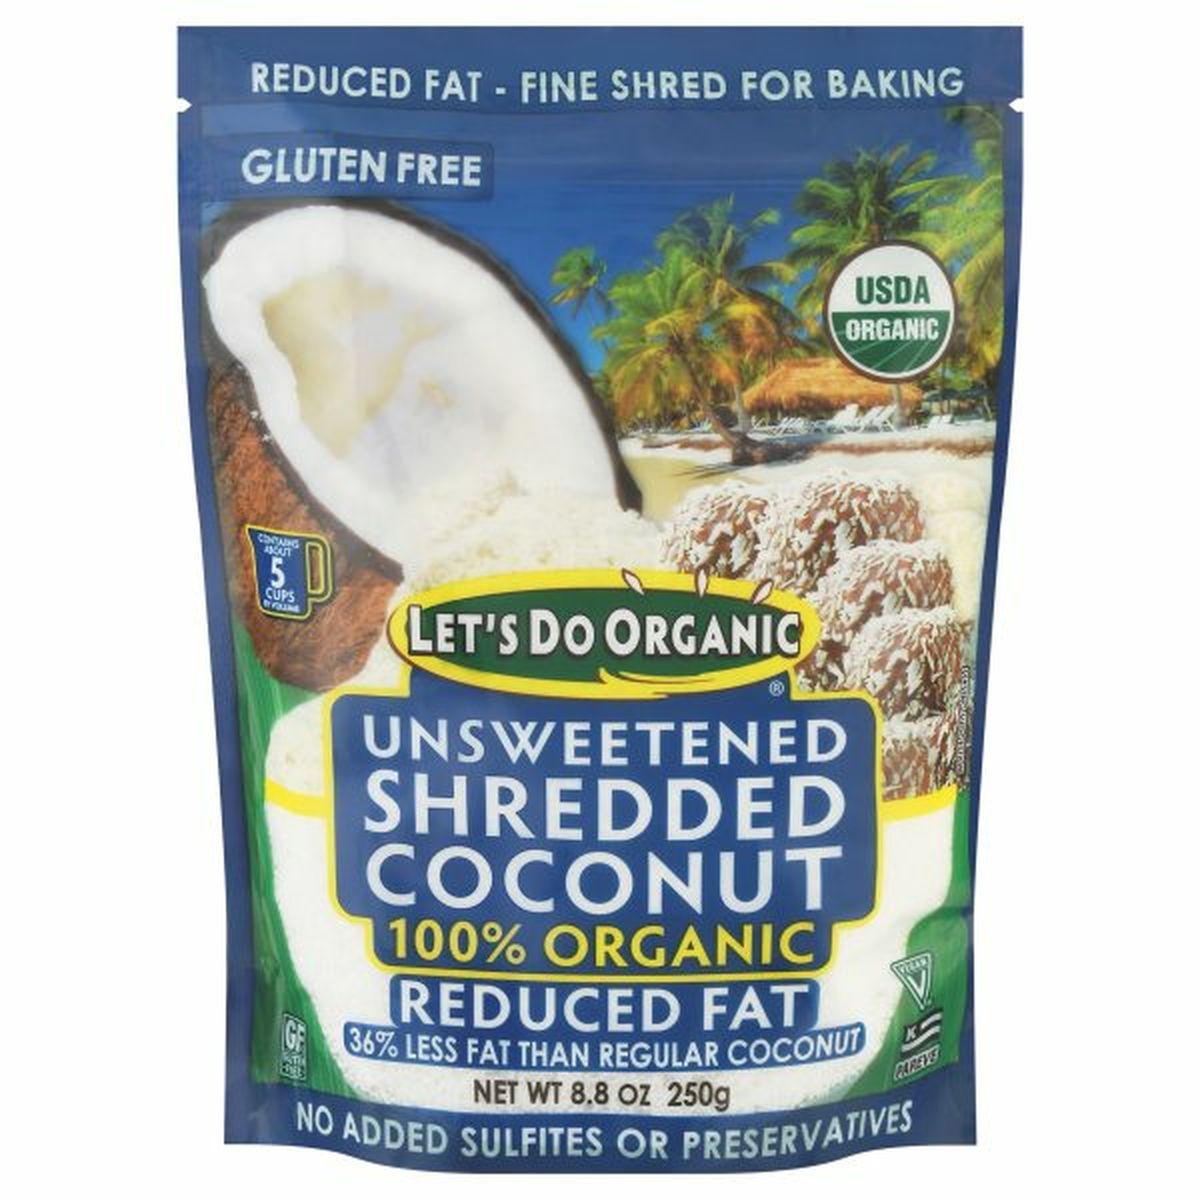 Calories in Let's Do Organic Shredded Coconut, Reduced Fat, Unsweetened